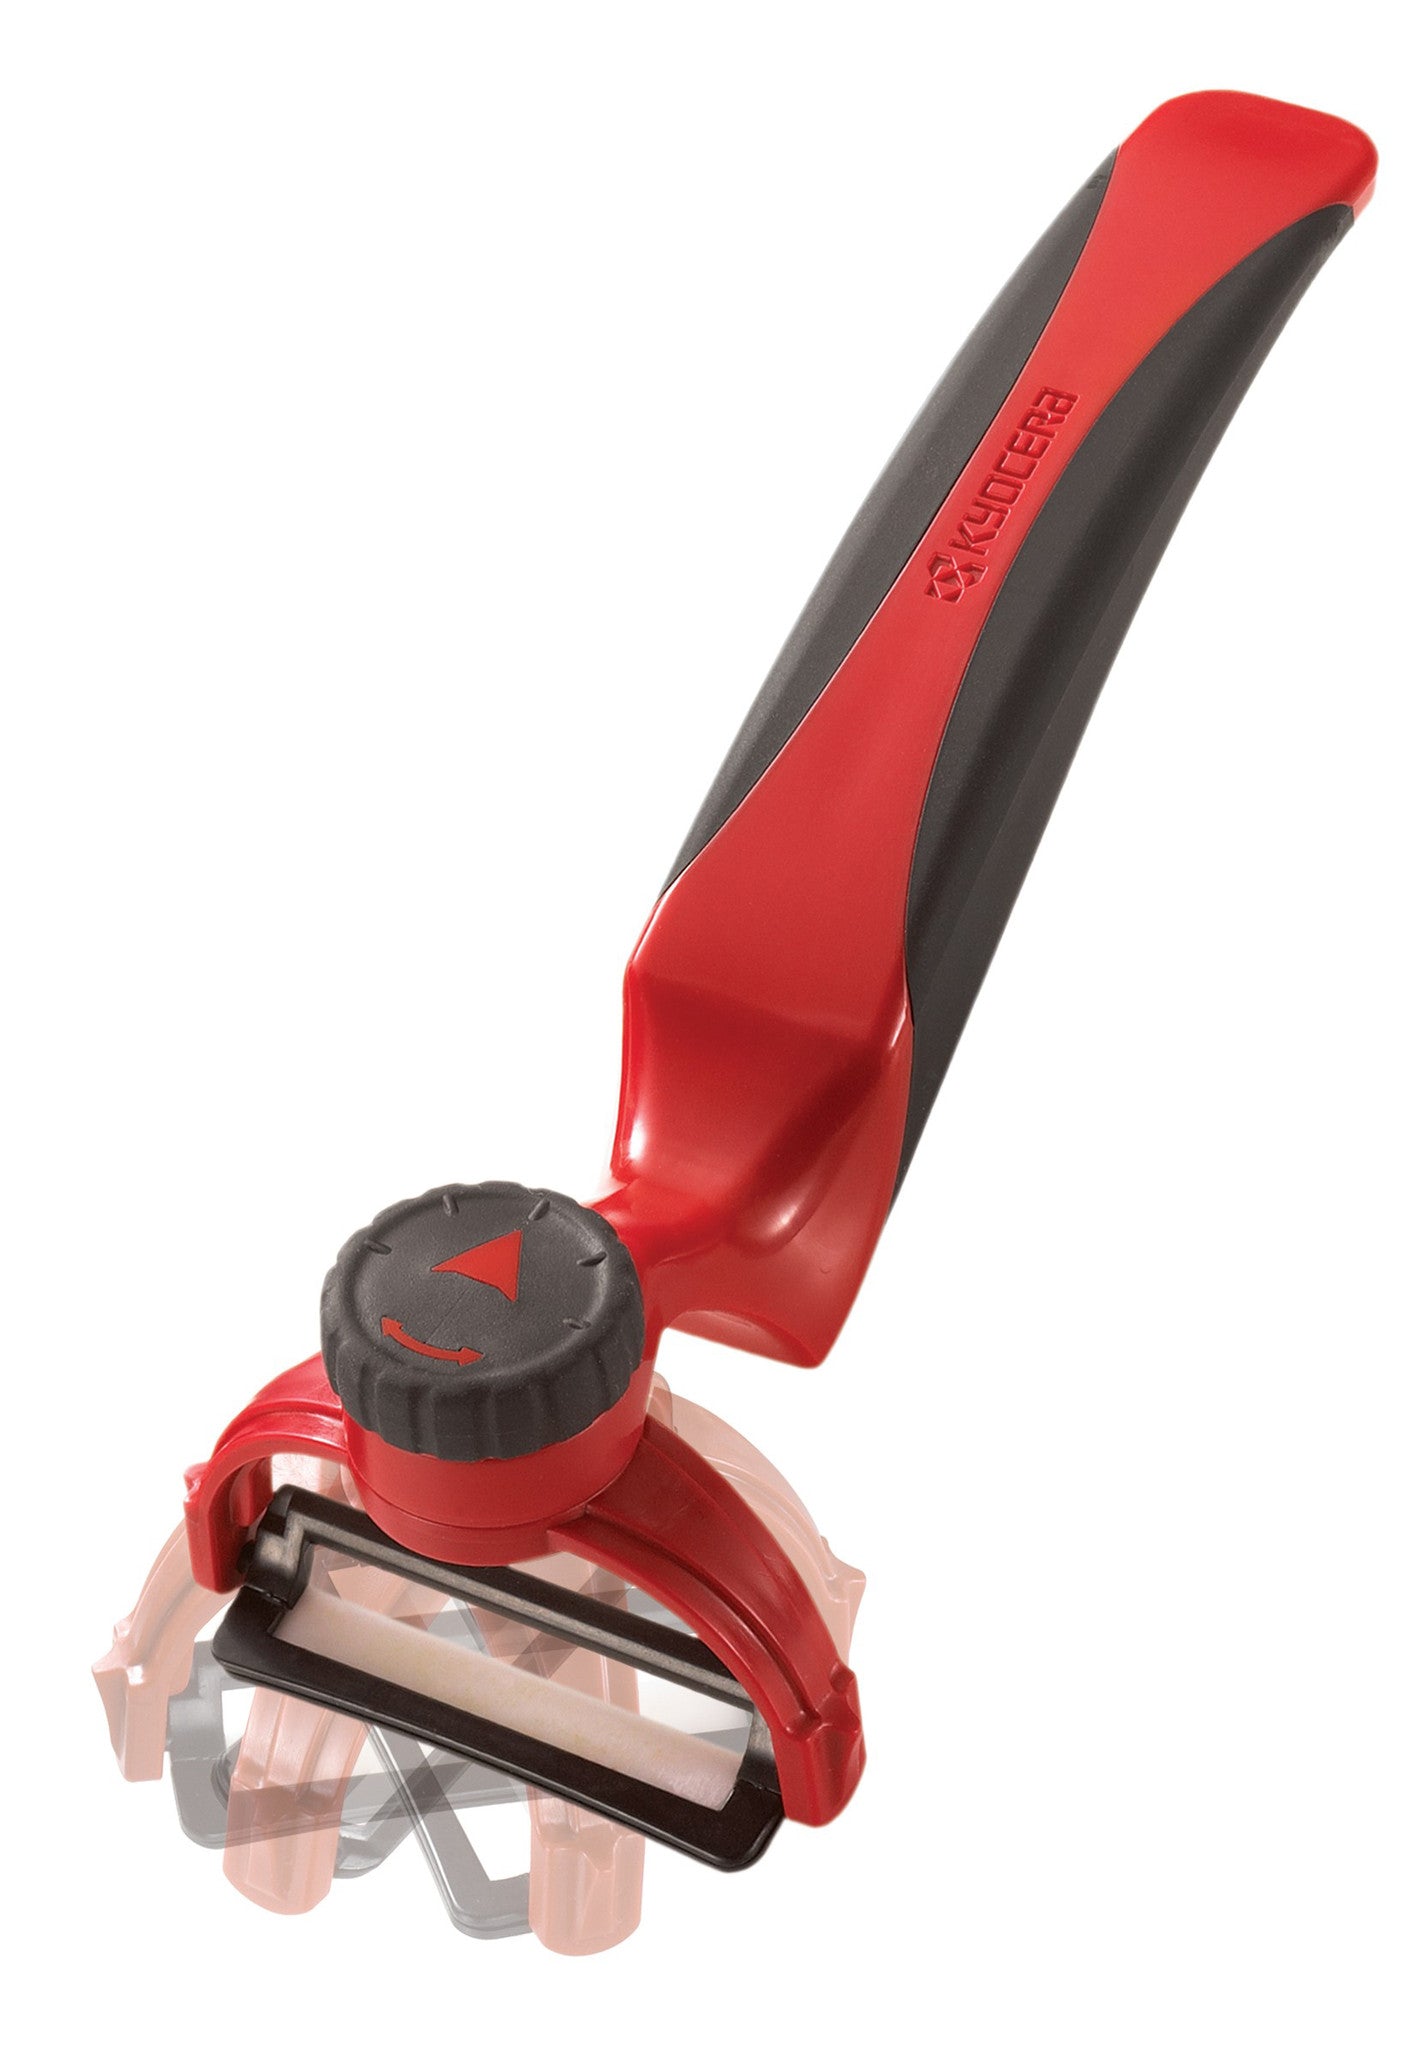 KYOCERA > This essential kitchen peeler has an ultra-sharp, single